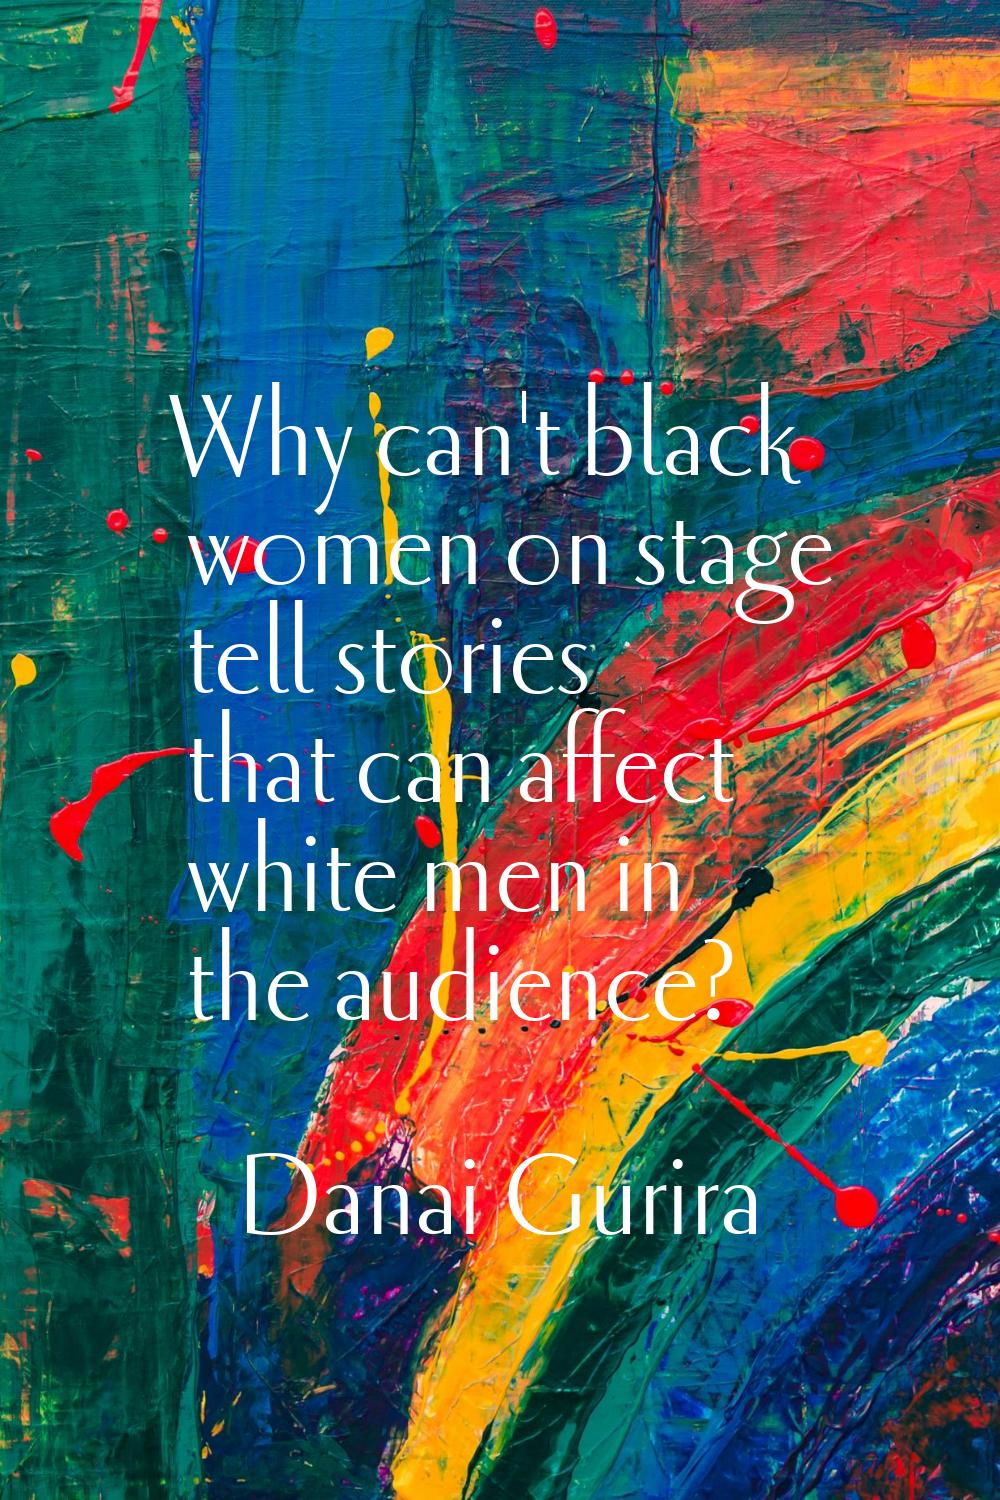 Why can't black women on stage tell stories that can affect white men in the audience?